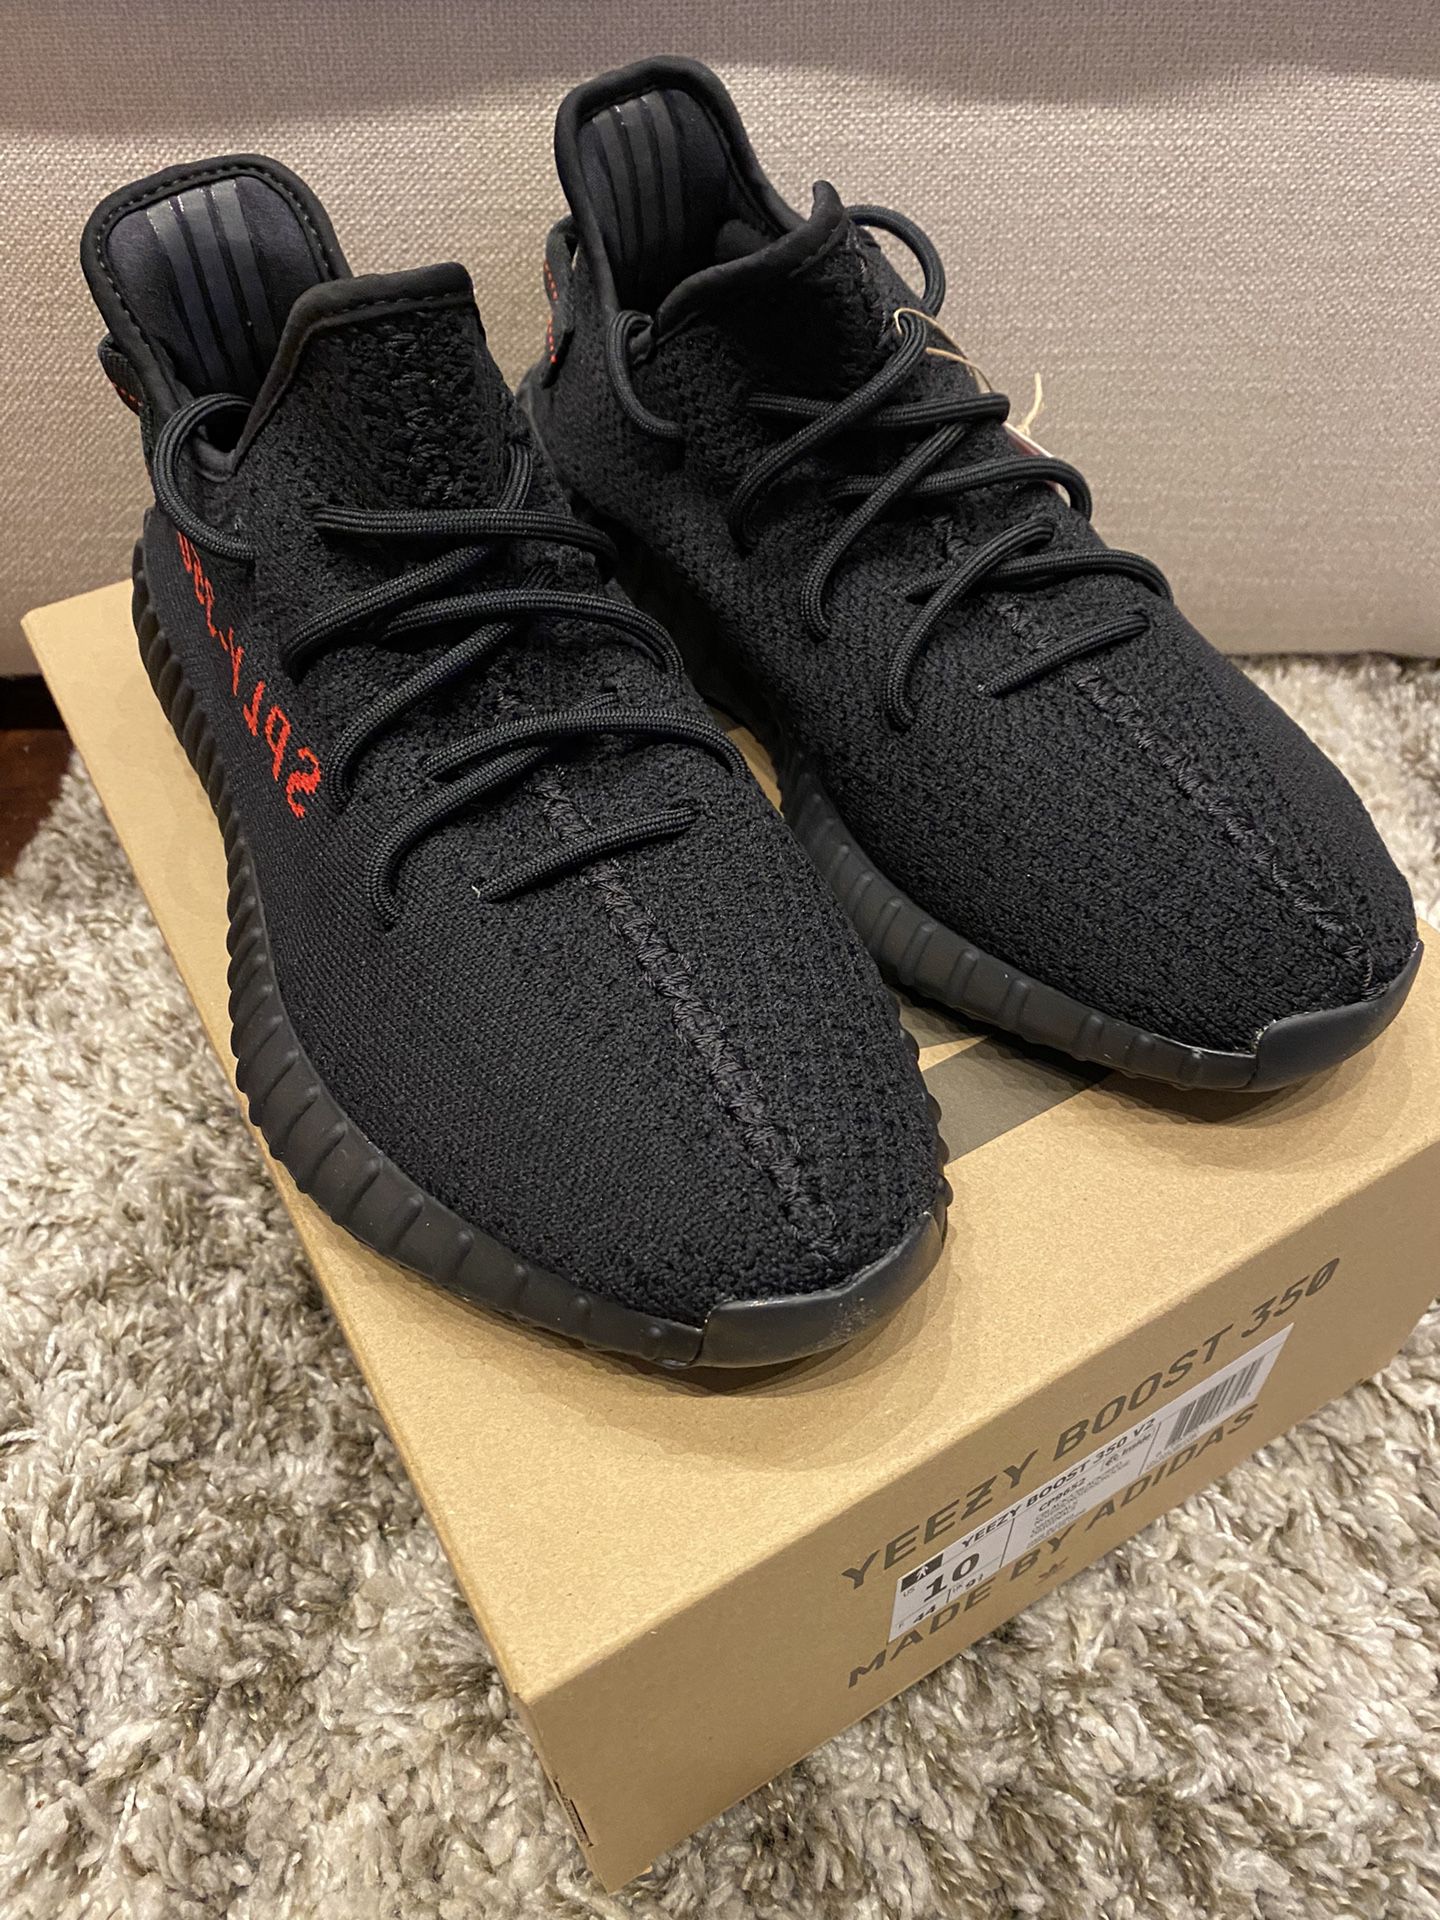 Boost 350 v2 Pirate size 10 for Sale San Francisco, CA - OfferUp